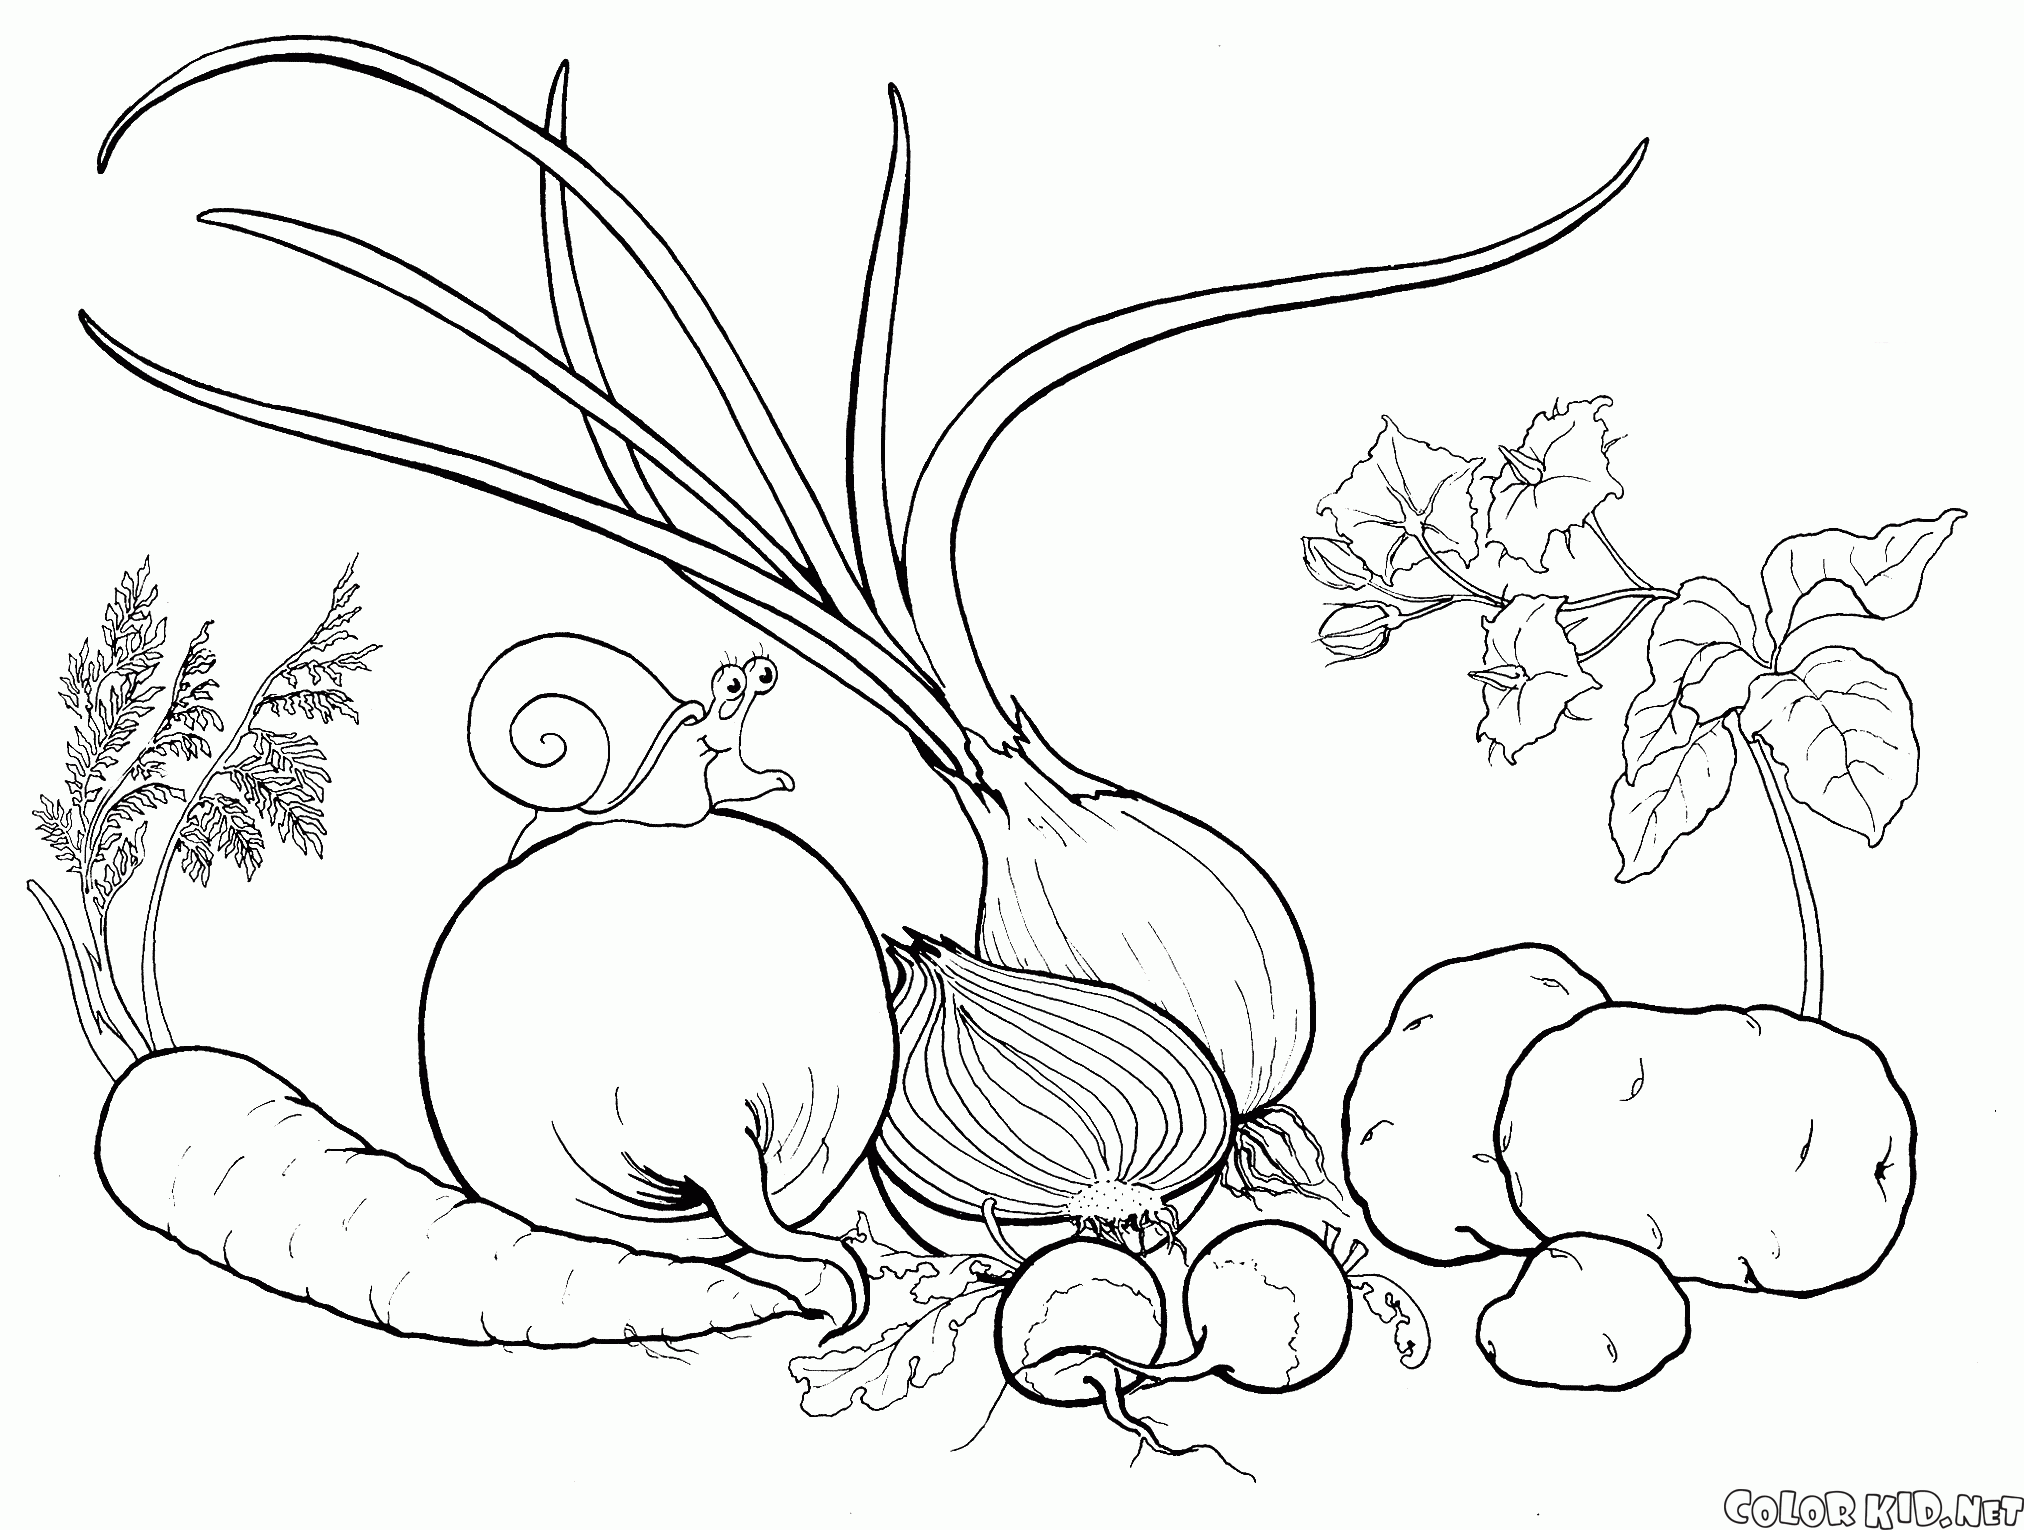 Coloring page - Vegetables from the garden